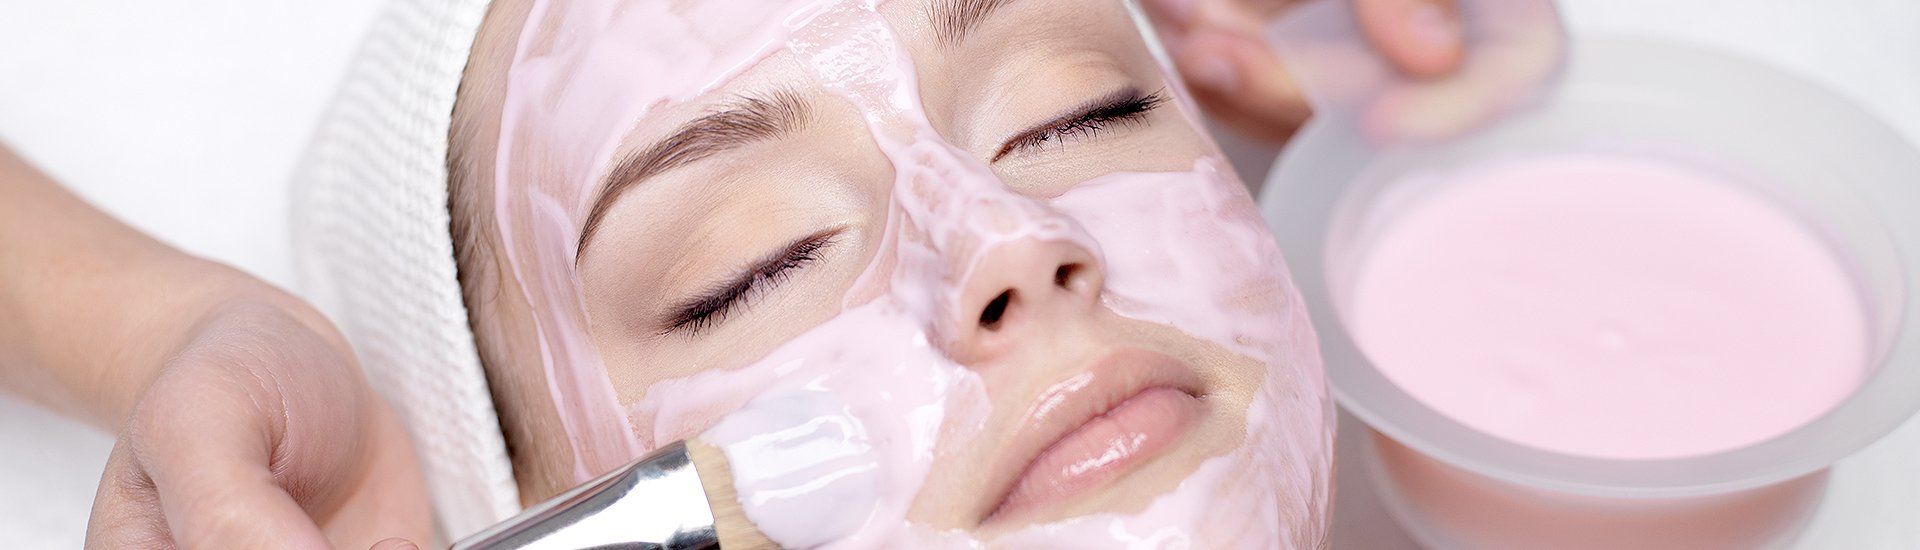 facial treatments using reputable products